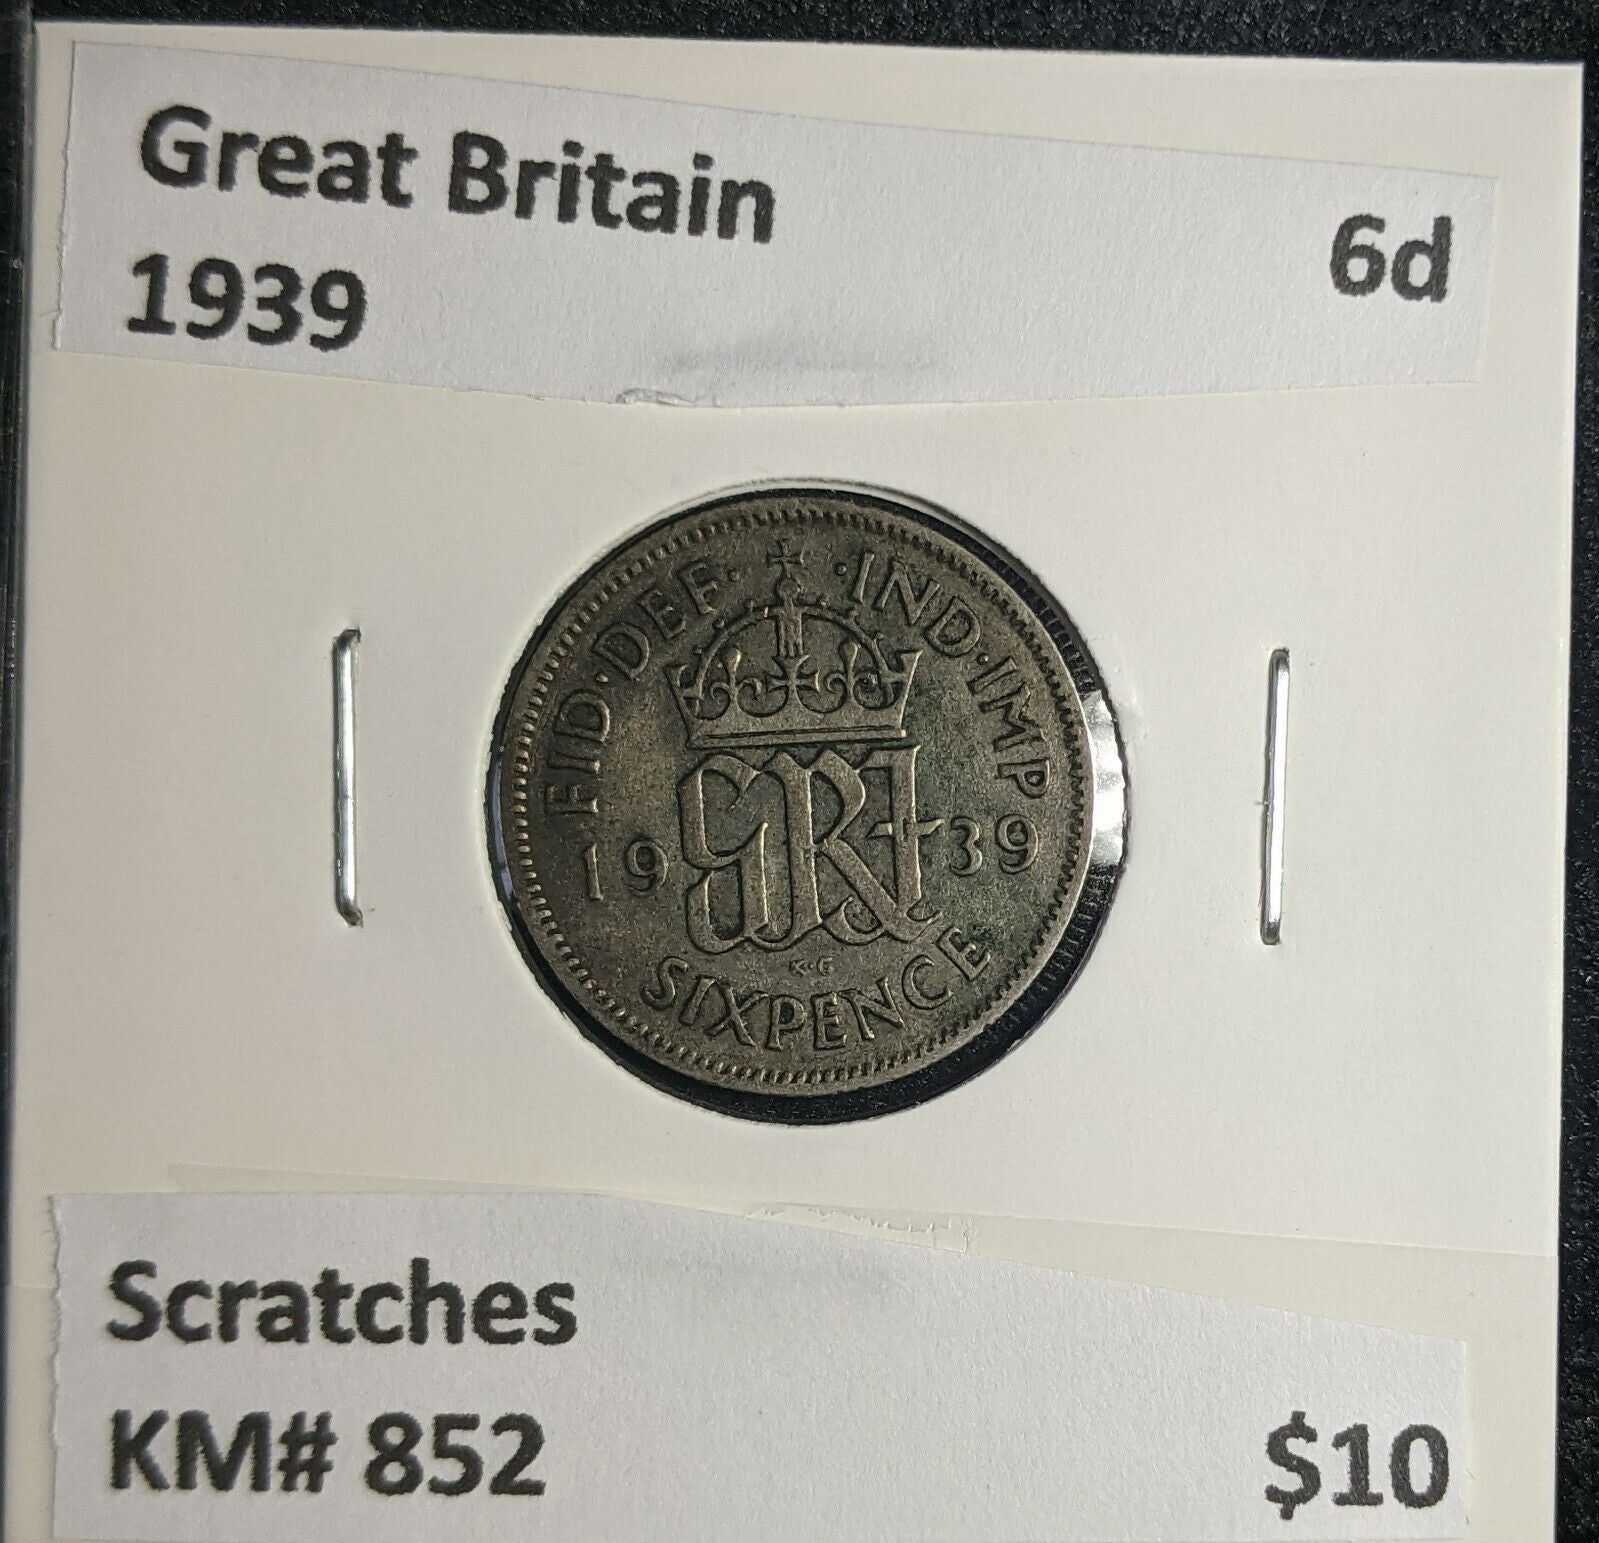 Great Britain 1939 6 Pence Sixpence 6d KM# 852 Scratches #373 5A